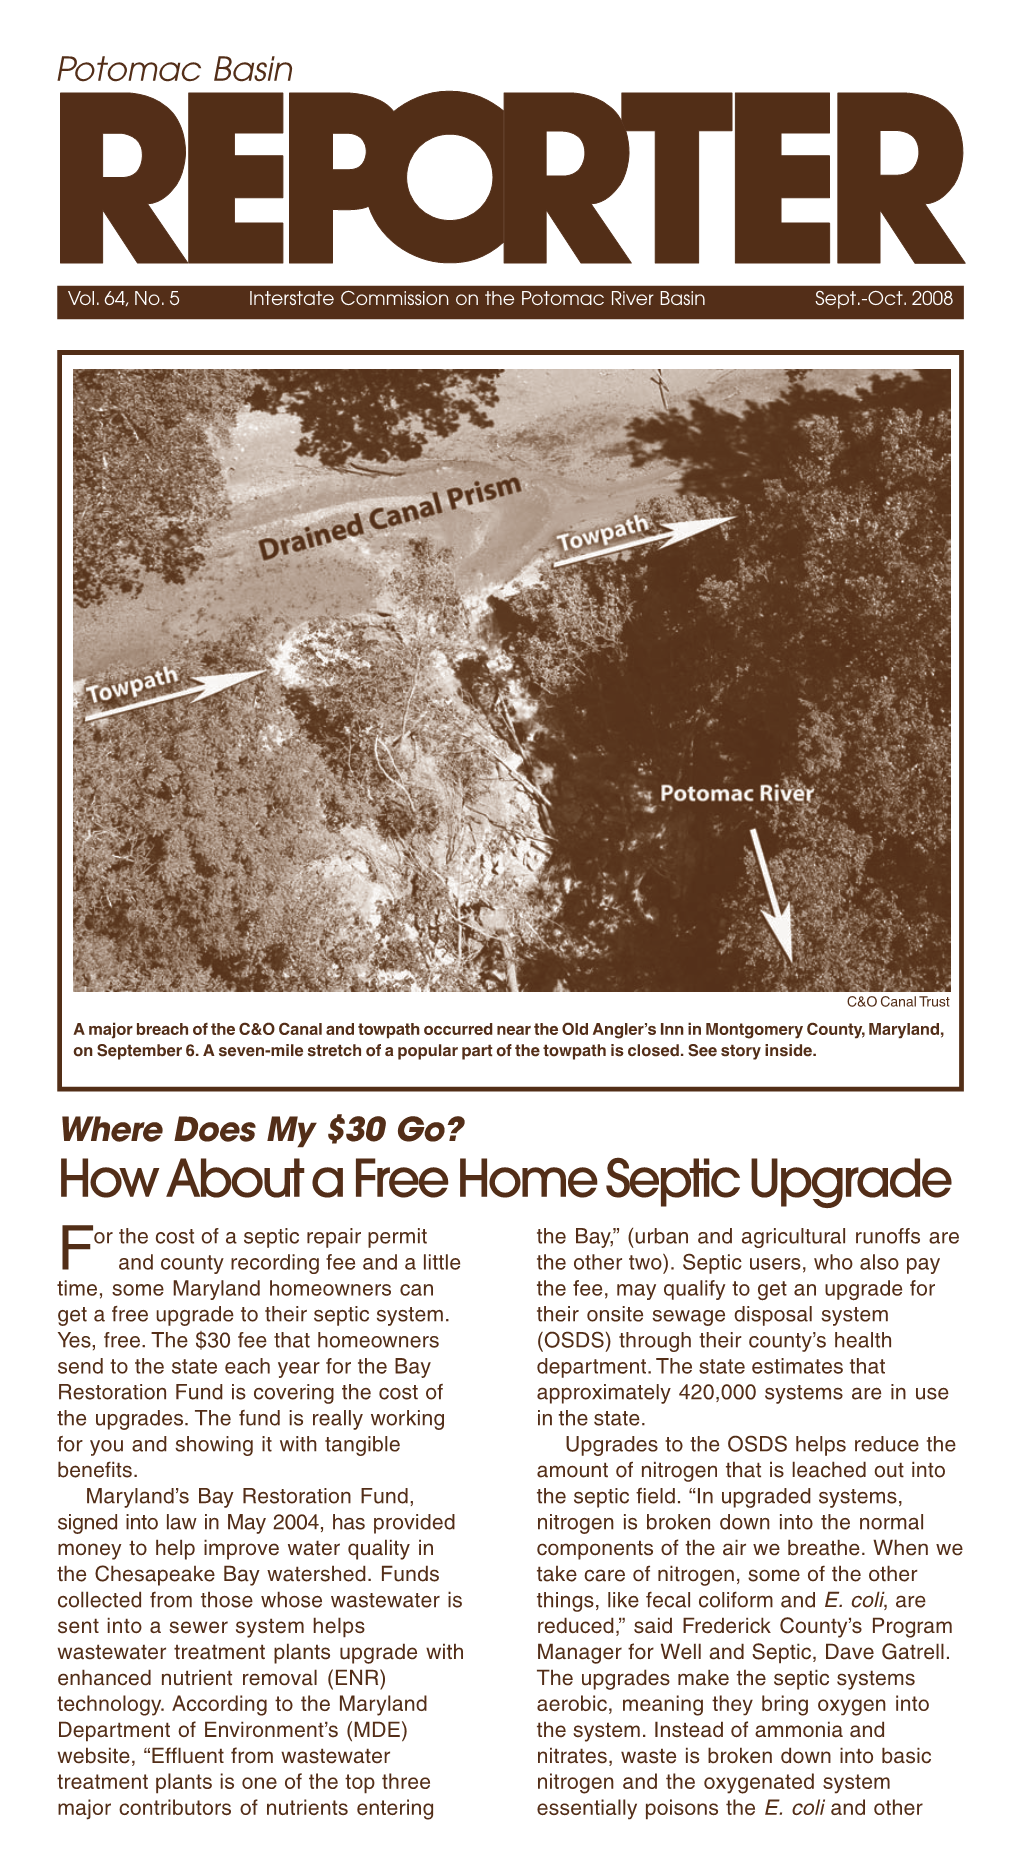 How About a Free Home Septic Upgrade